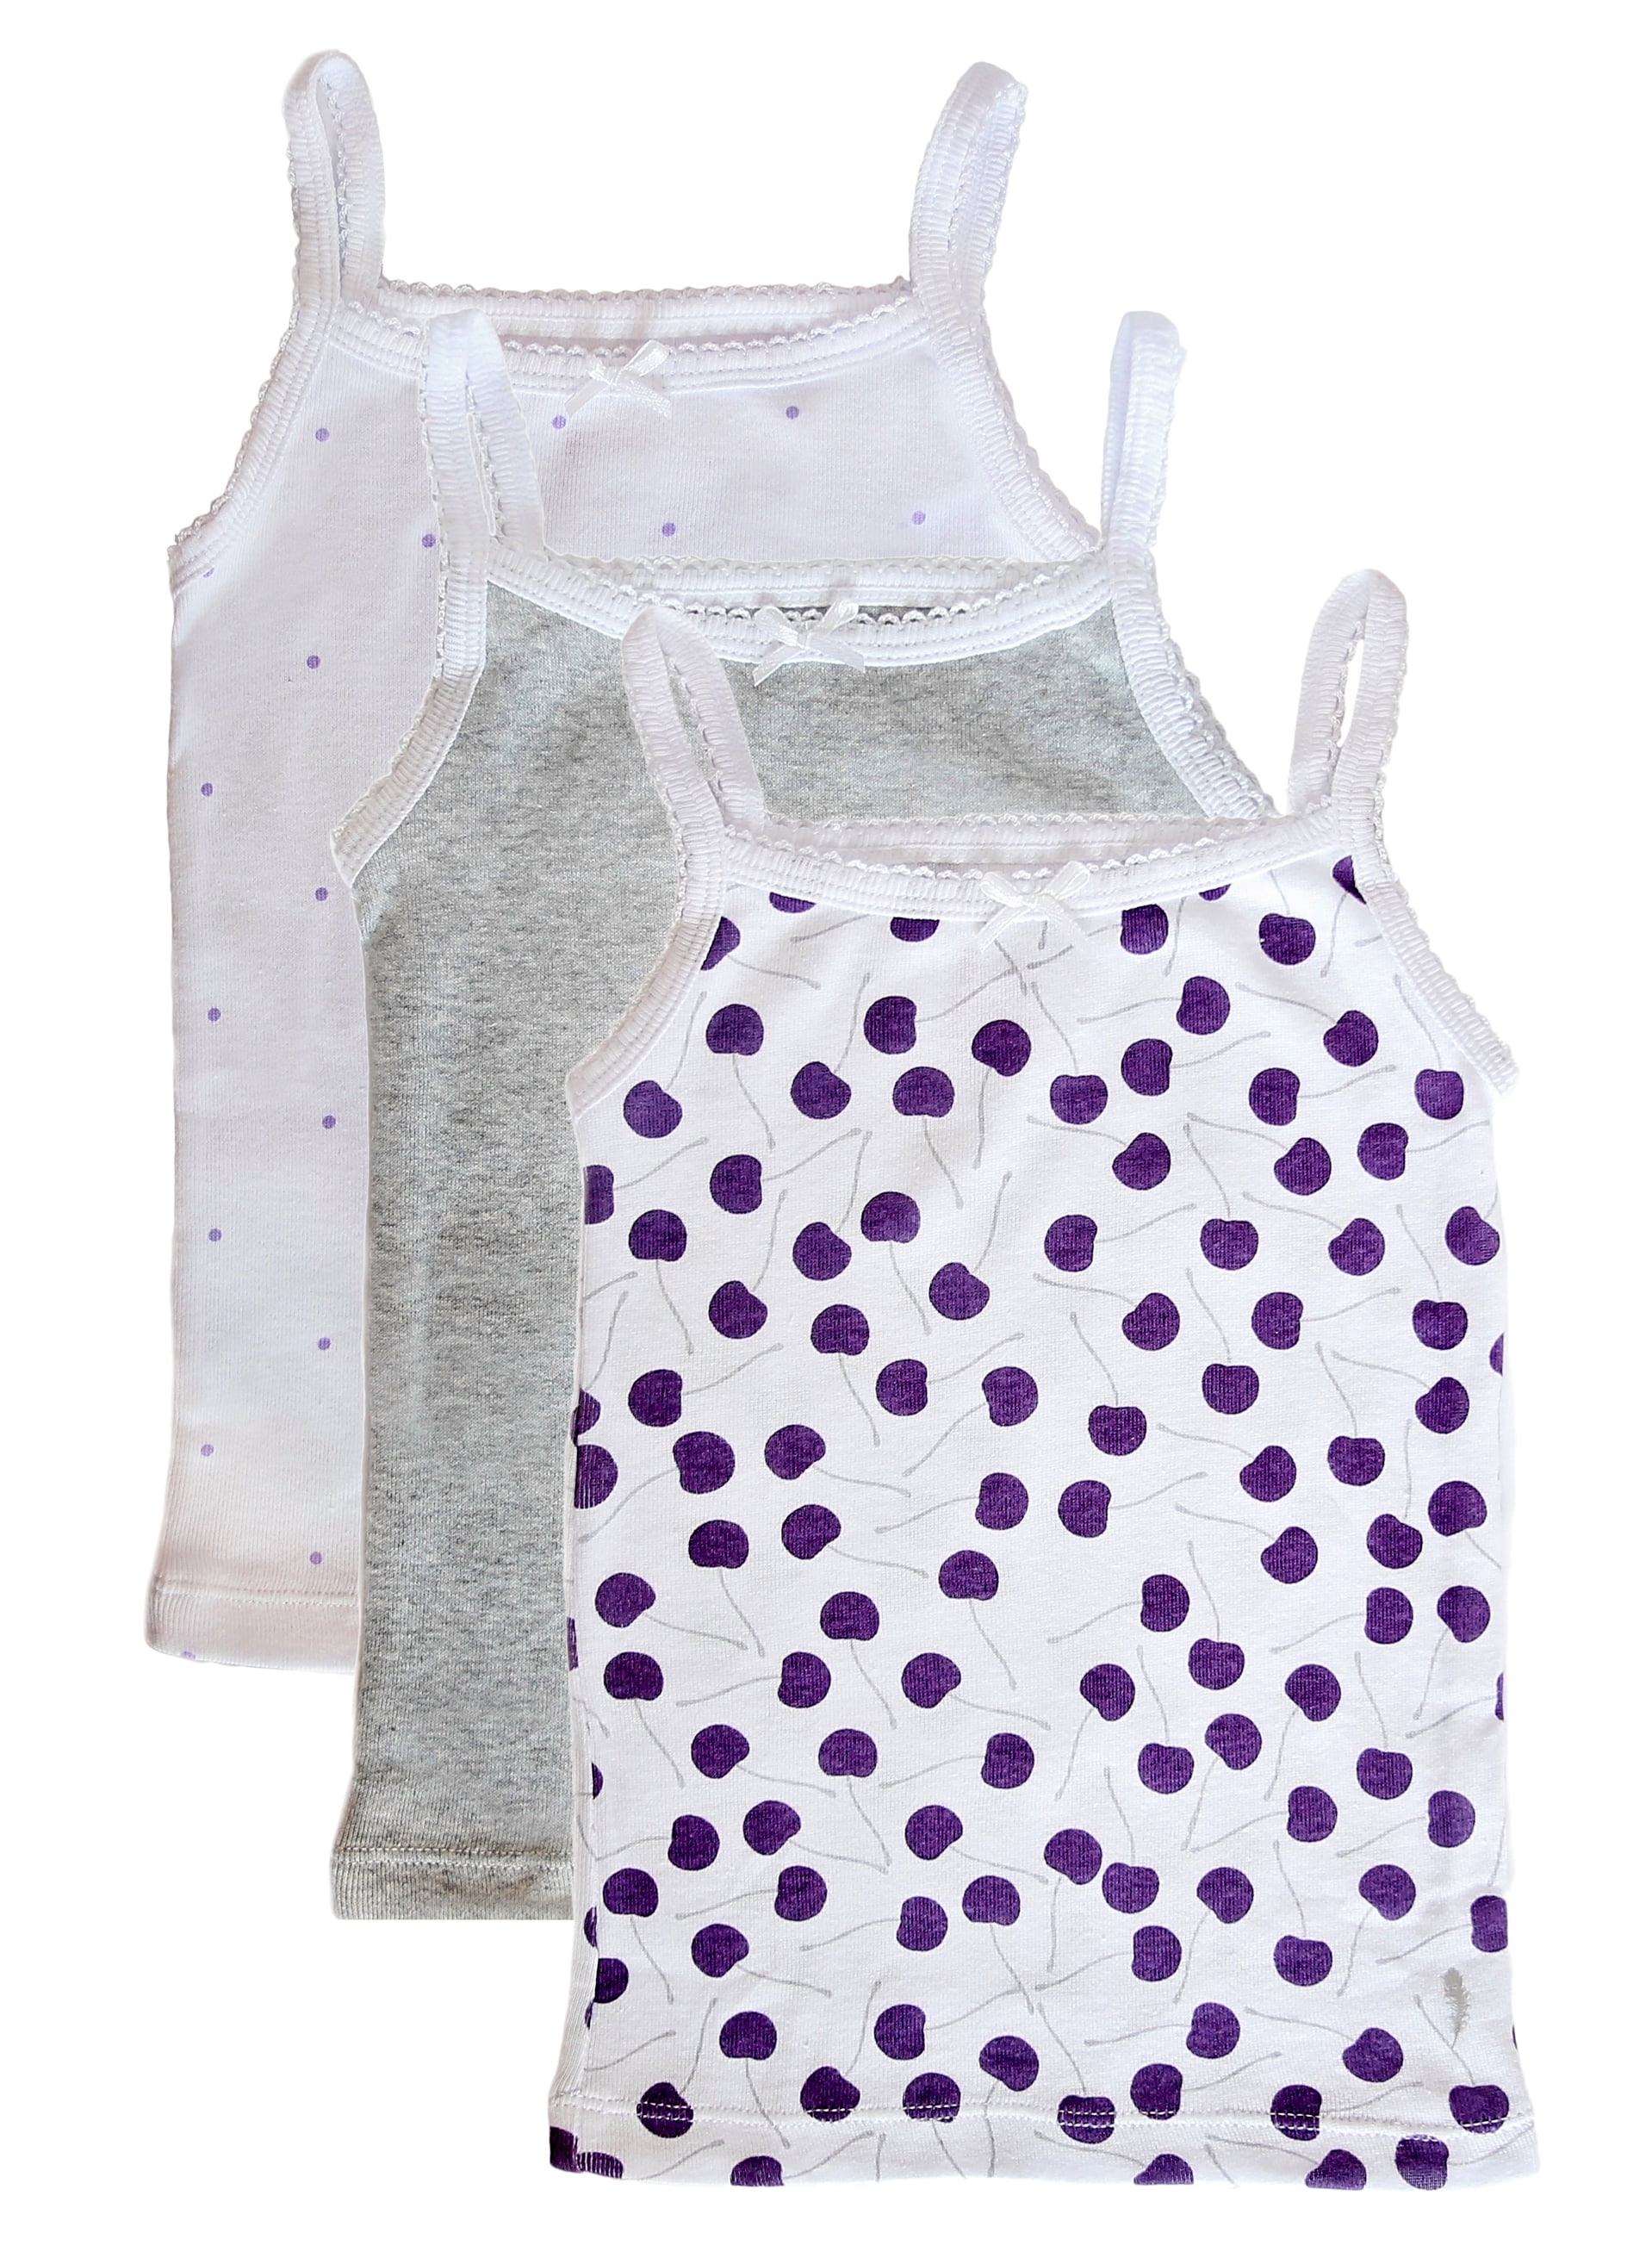 100% Cotton Super Soft Undershirts Feathers Girls Solid White Snug Fit Tagless Cami Vest 3/Pack 